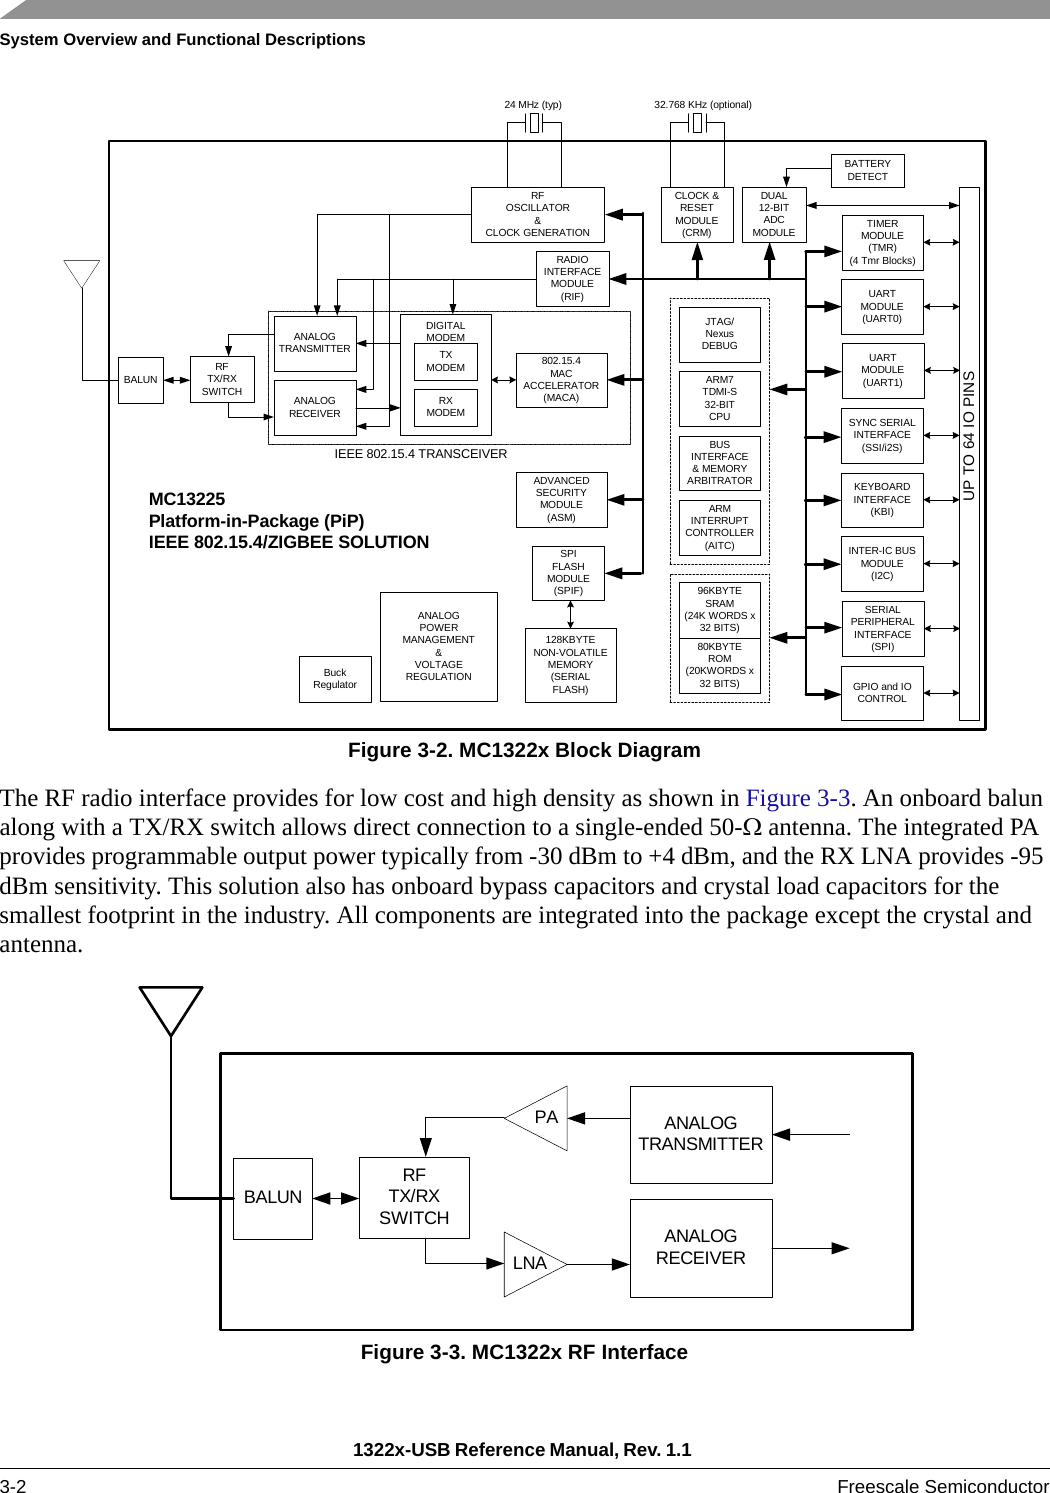 System Overview and Functional Descriptions1322x-USB Reference Manual, Rev. 1.1 3-2 Freescale SemiconductorFigure 3-2. MC1322x Block DiagramThe RF radio interface provides for low cost and high density as shown in Figure 3-3. An onboard balun along with a TX/RX switch allows direct connection to a single-ended 50-Ω antenna. The integrated PA provides programmable output power typically from -30 dBm to +4 dBm, and the RX LNA provides -95 dBm sensitivity. This solution also has onboard bypass capacitors and crystal load capacitors for the smallest footprint in the industry. All components are integrated into the package except the crystal and antenna.Figure 3-3. MC1322x RF InterfaceTIMERMODULE(TMR)(4 Tmr Blocks)UARTMODULE(UART0)UARTMODULE(UART1)SYNC SERIALINTERFACE(SSI/i2S)KEYBOARDINTERFACE(KBI)INTER-IC BUSMODULE(I2C)SERIALPERIPHERALINTERFACE(SPI)DUAL12-BITADCMODULEGPIO and IOCONTROLUP TO 64 IO PINSARM7TDMI-S32-BITCPUBUSINTERFACE&amp; MEMORYARBITRATORARMINTERRUPTCONTROLLER(AITC)JTAG/NexusDEBUGADVANCEDSECURITYMODULE(ASM)CLOCK &amp;RESETMODULE(CRM)RADIOINTERFACEMODULE(RIF)96KBYTESRAM(24K WORDS x32 BITS)80KBYTEROM(20KWORDS x32 BITS)RFOSCILLATOR&amp;CLOCK GENERATIONSPIFLASHMODULE(SPIF)802.15.4MACACCELERATOR(MACA)DIGITALMODEMTXMODEMRXMODEM128KBYTENON-VOLATILEMEMORY(SERIALFLASH)ANALOGTRANSMITTERANALOGRECEIVERRFTX/RXSWITCHIEEE 802.15.4 TRANSCEIVERBALUNANALOGPOWERMANAGEMENT&amp;VOLTAGEREGULATIONMC13225Platform-in-Package (PiP)IEEE 802.15.4/ZIGBEE SOLUTIONBuckRegulator24 MHz (typ) 32.768 KHz (optional)BATTERYDETECTANALOGTRANSMITTERANALOGRECEIVERRFTX/RXSWITCHBALUNLNAPA